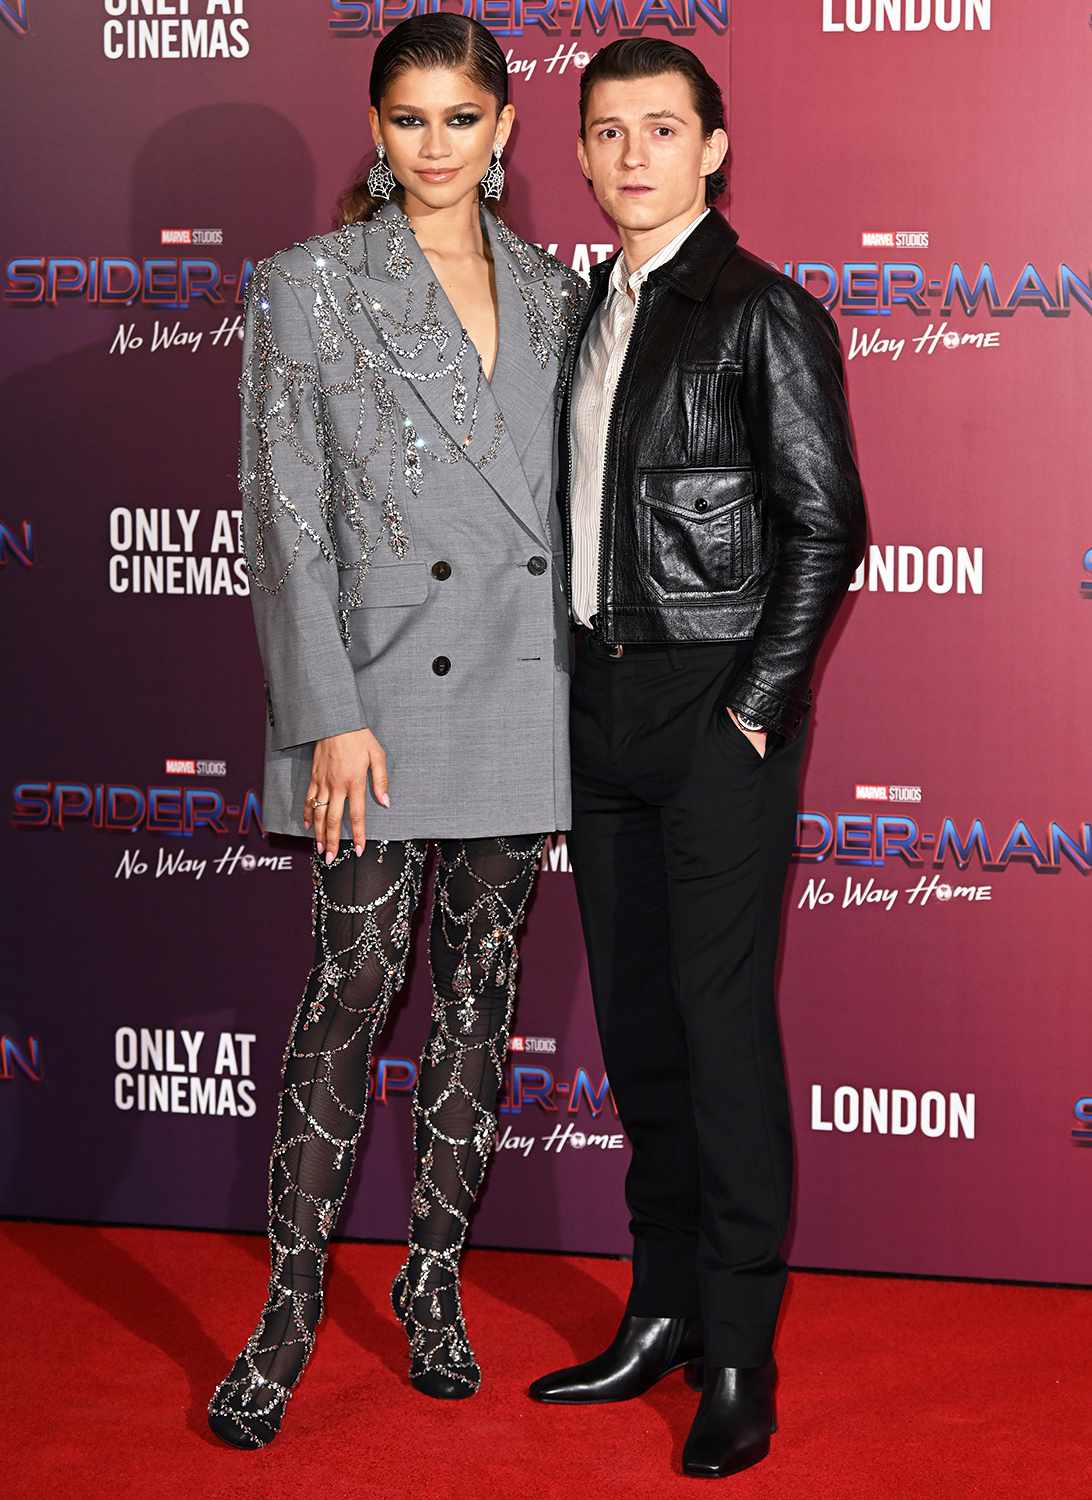 Tom Holland and Zendaya Pose at London Photocall for Spider-Man | PEOPLE.com